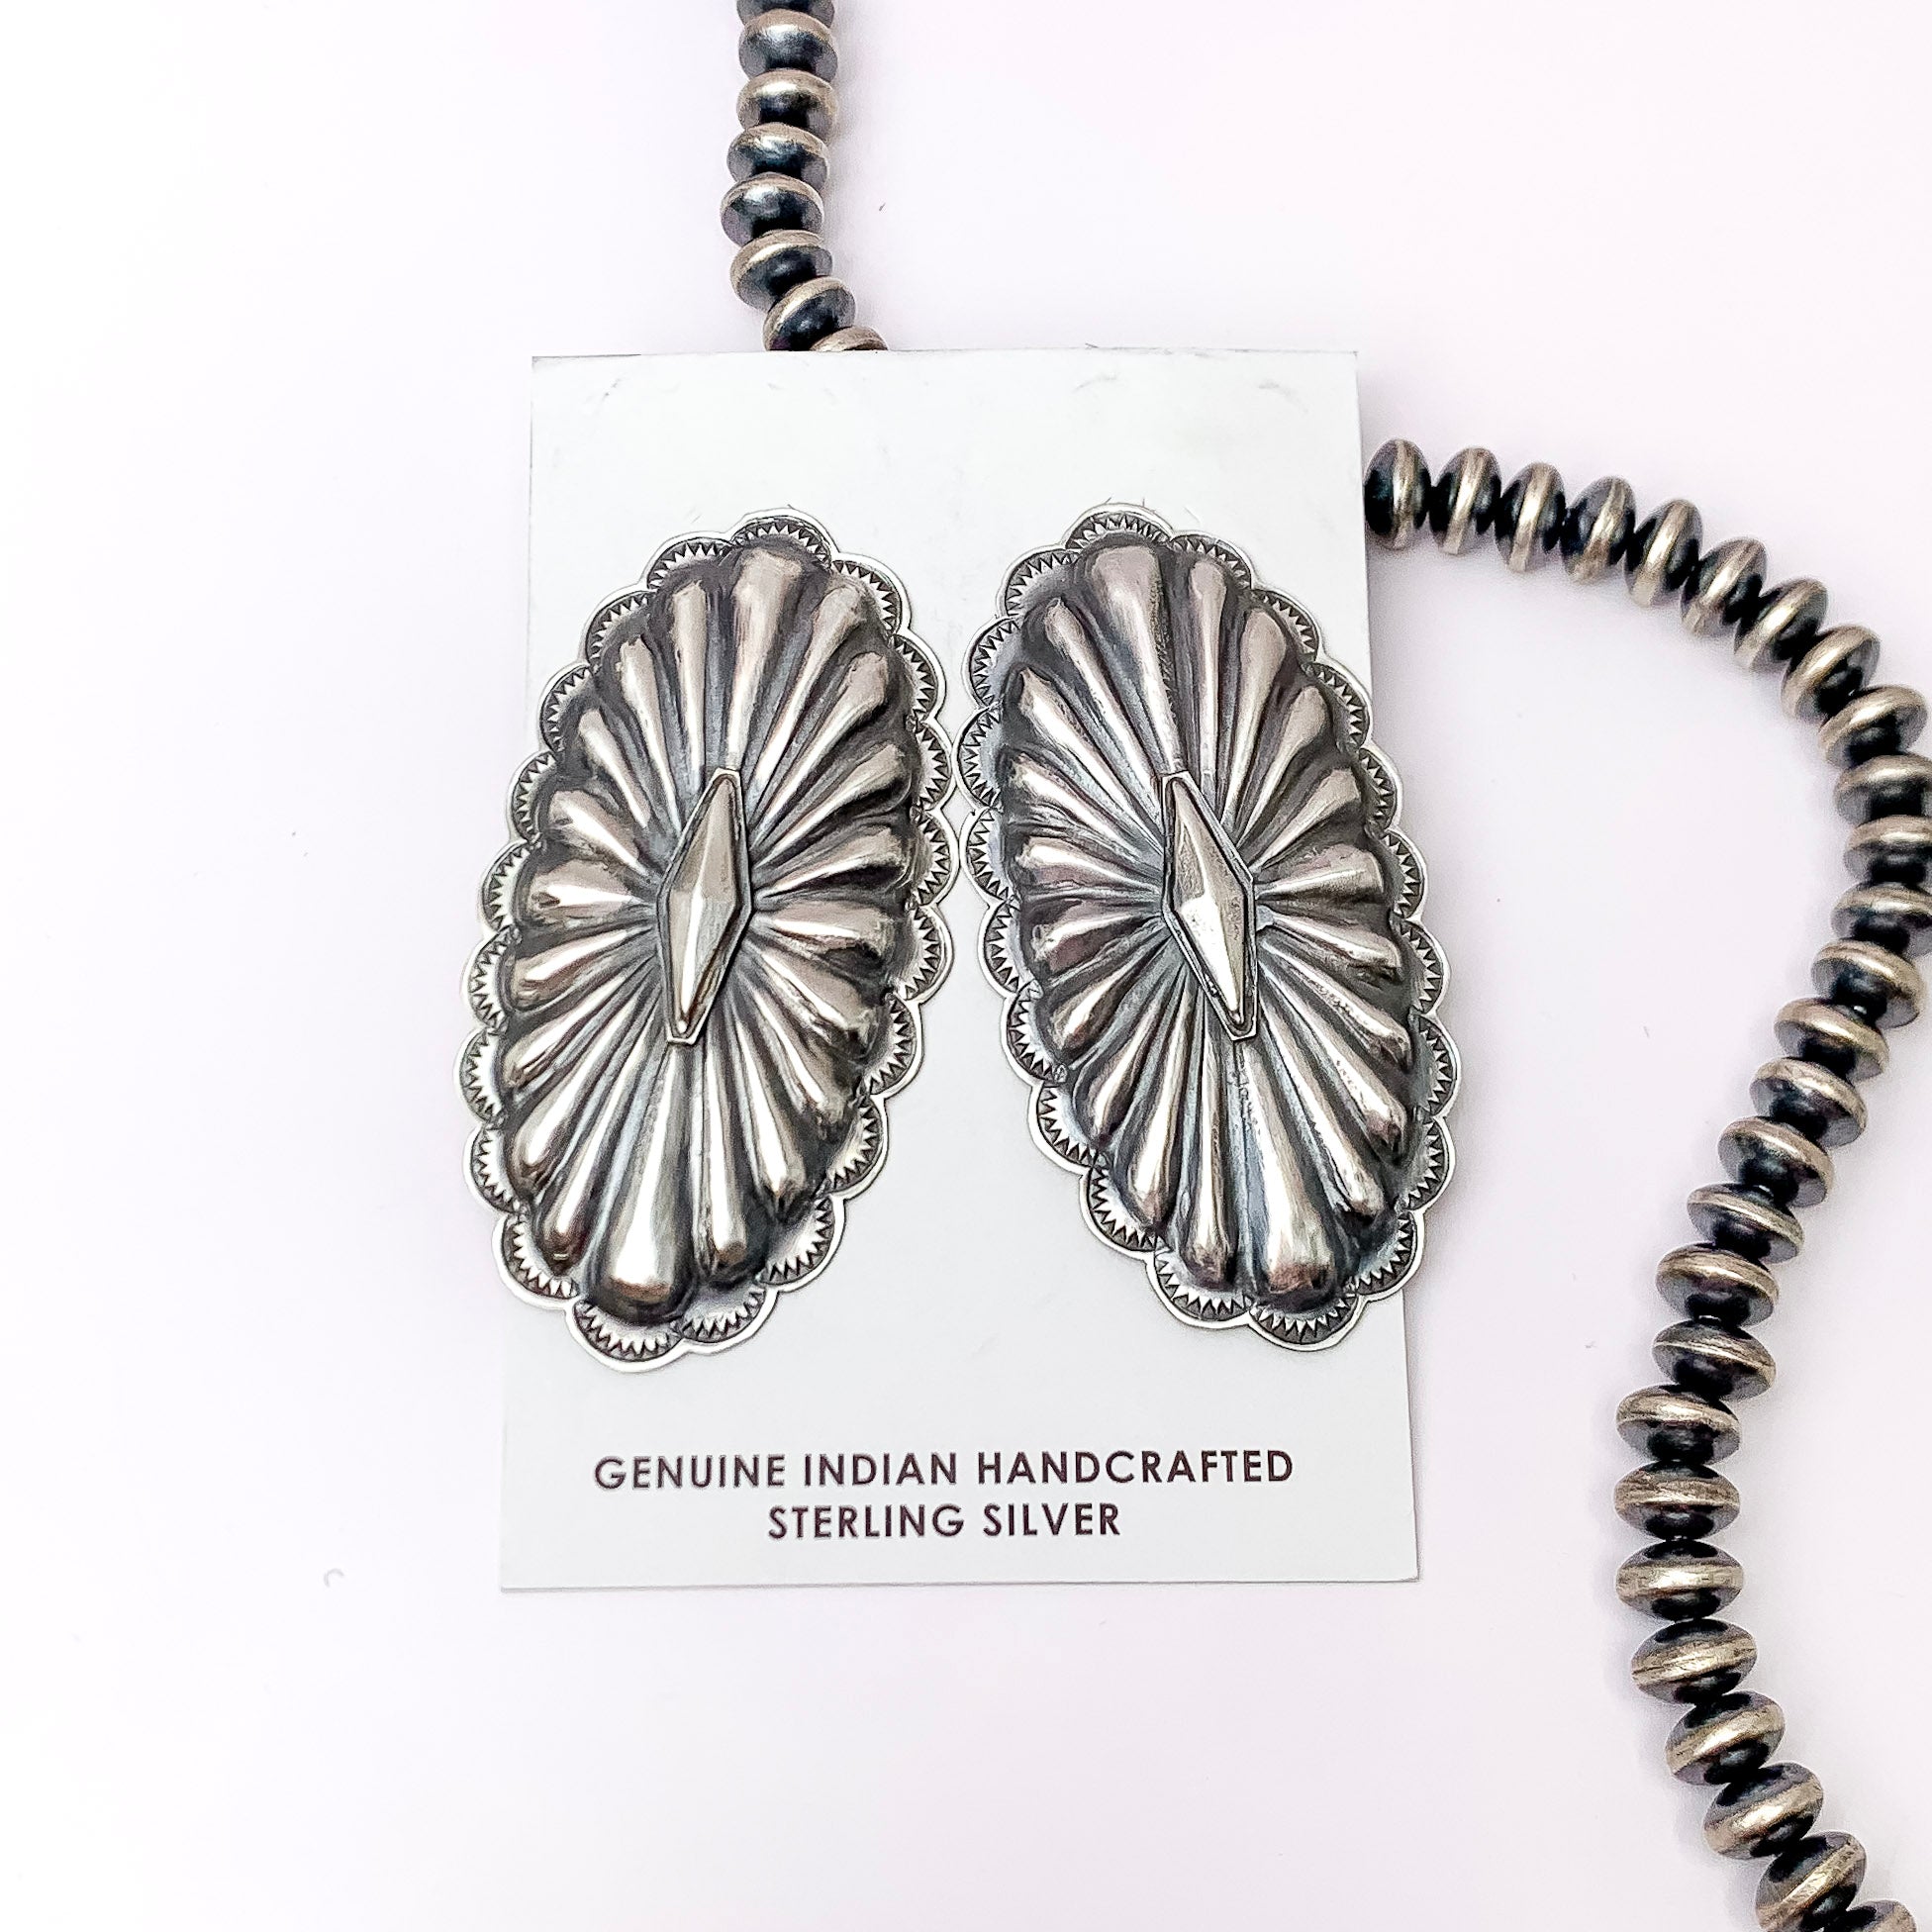 Centered in the picture is a pair of oval concho earrings on a white background. 